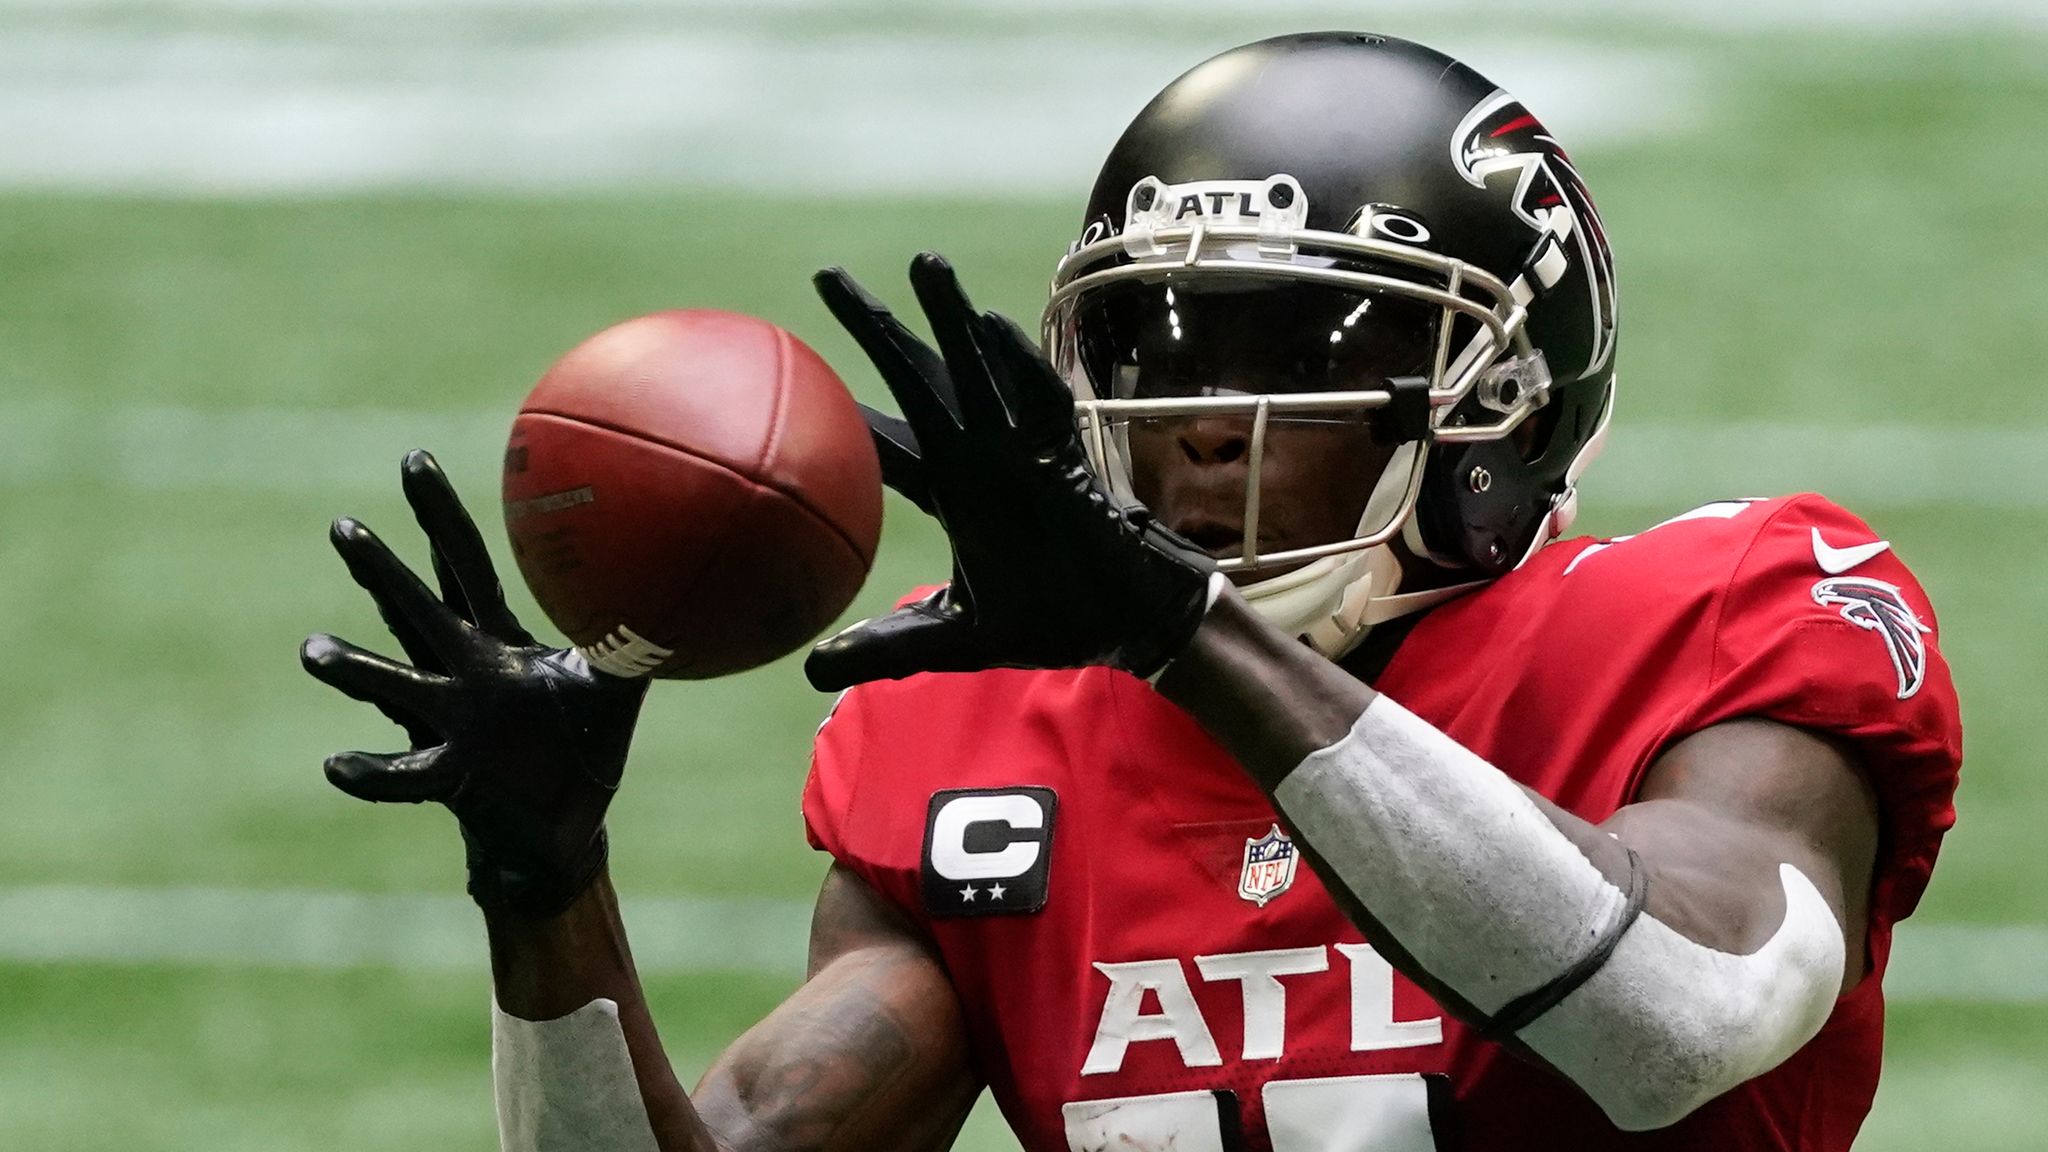 Is Julio Jones headed for a monster year under Kyle Shanahan? - The  Falcoholic